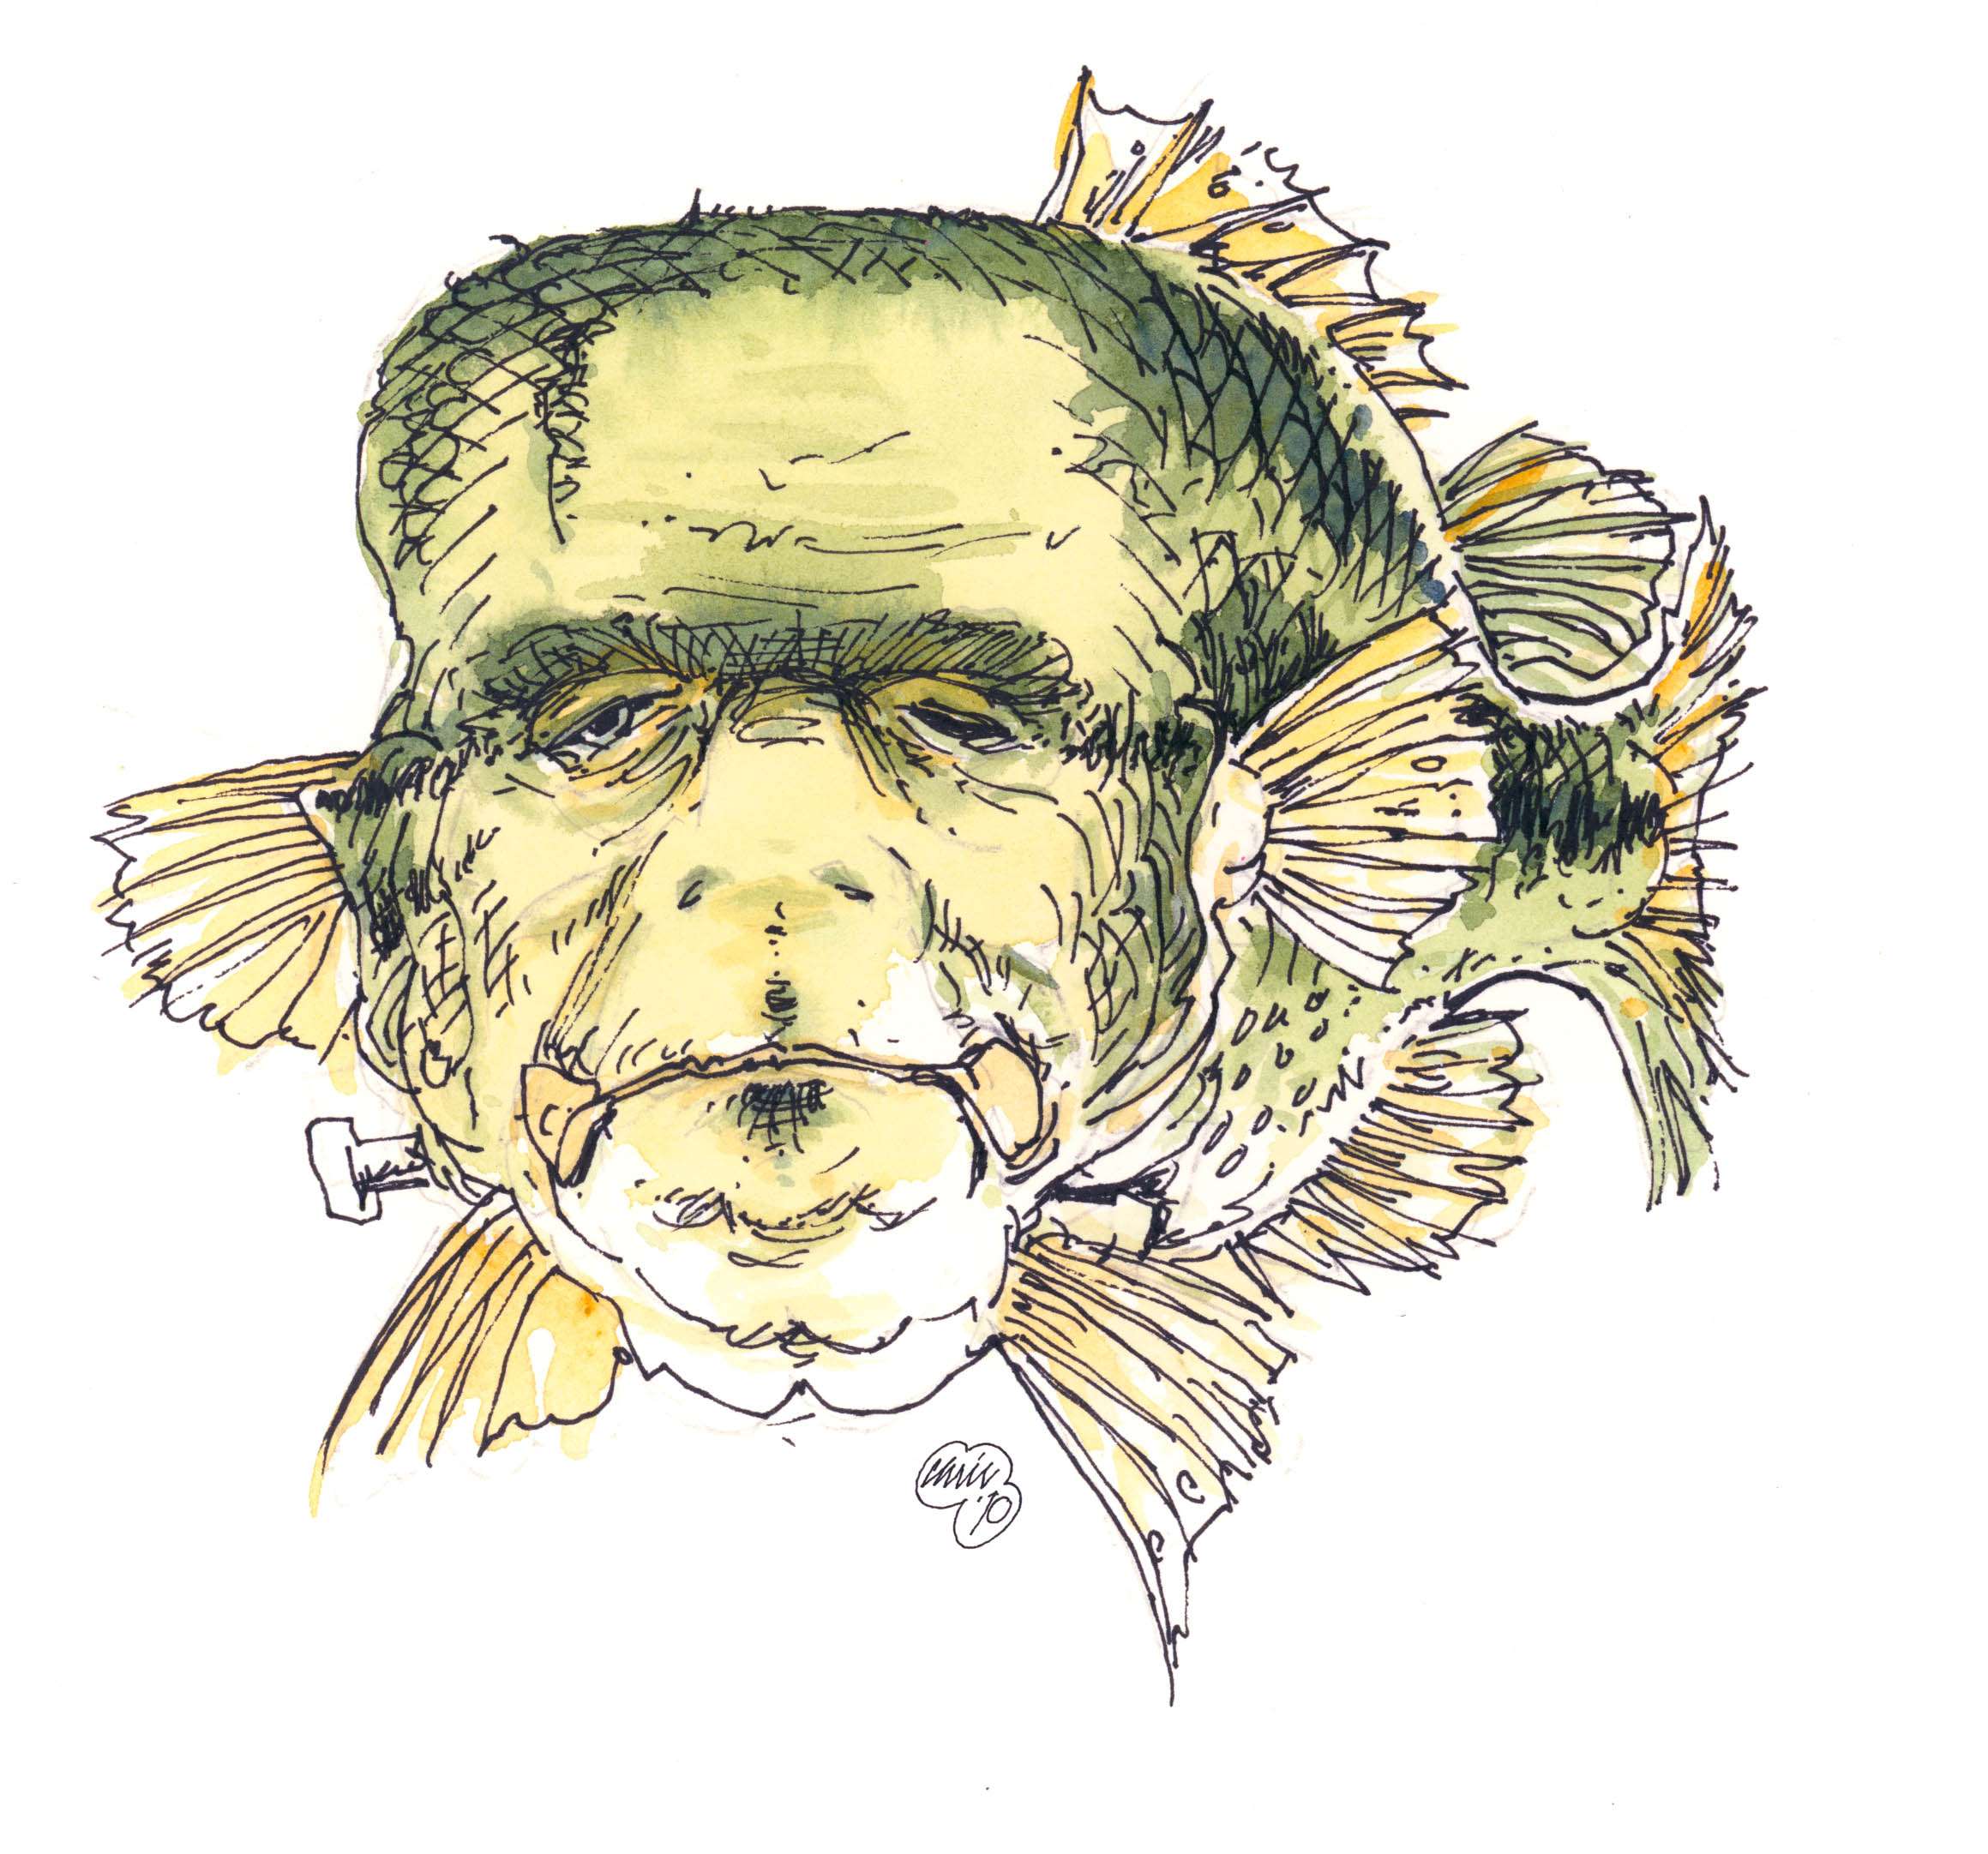 Armstrong also had the talent for humor in his art, from Frankenfish illustrations like this one to caricatures of weekend anglers, like in the next few slides.